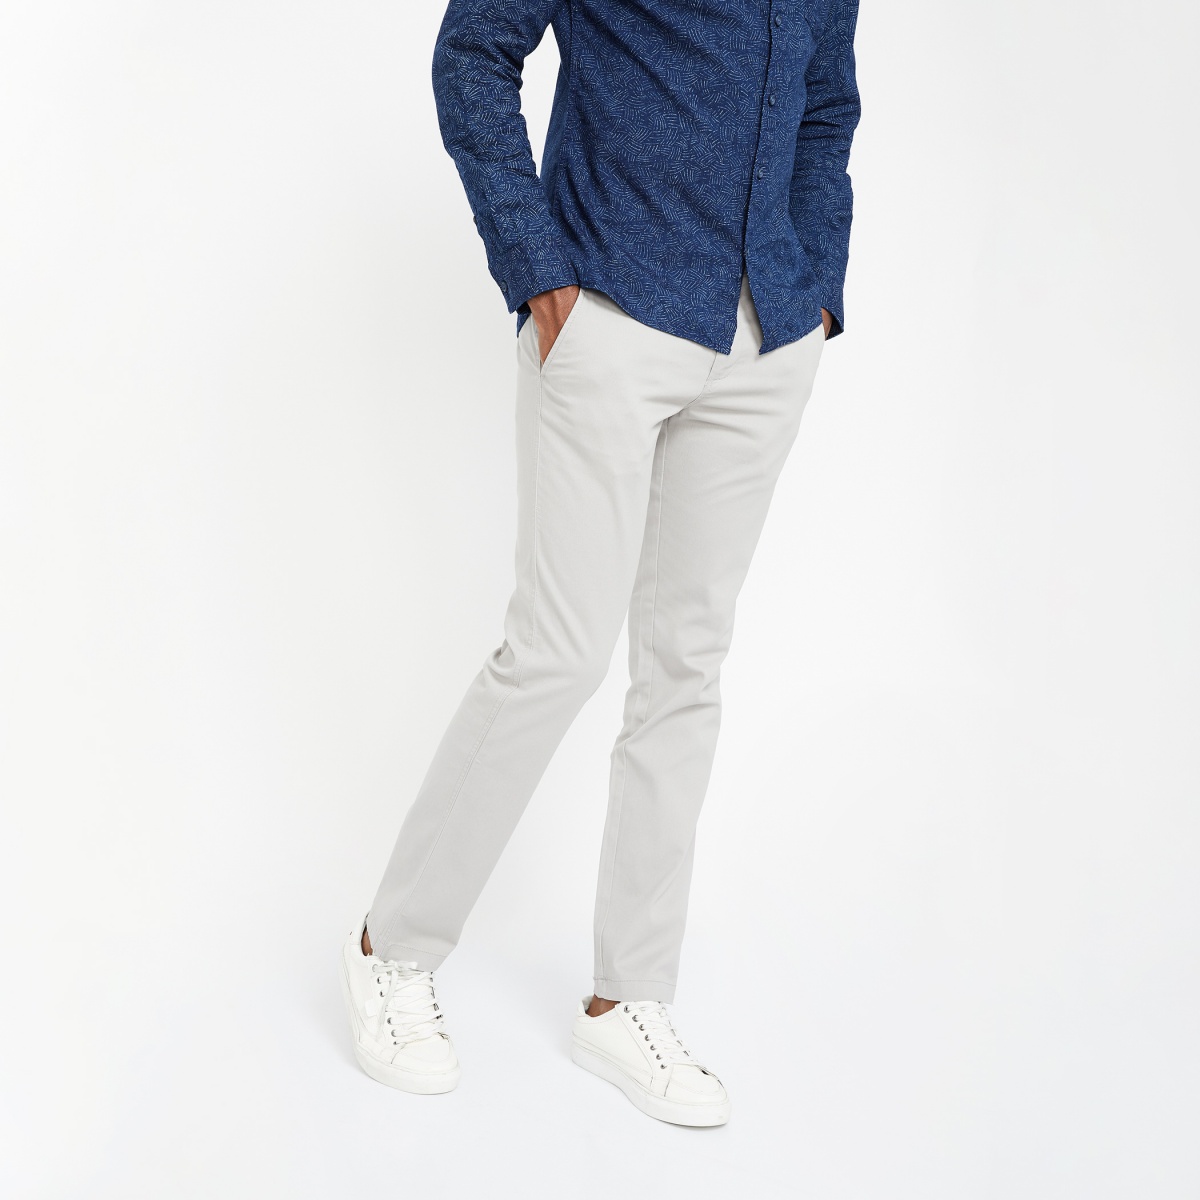 CODE Solid Flat-Front Chinos